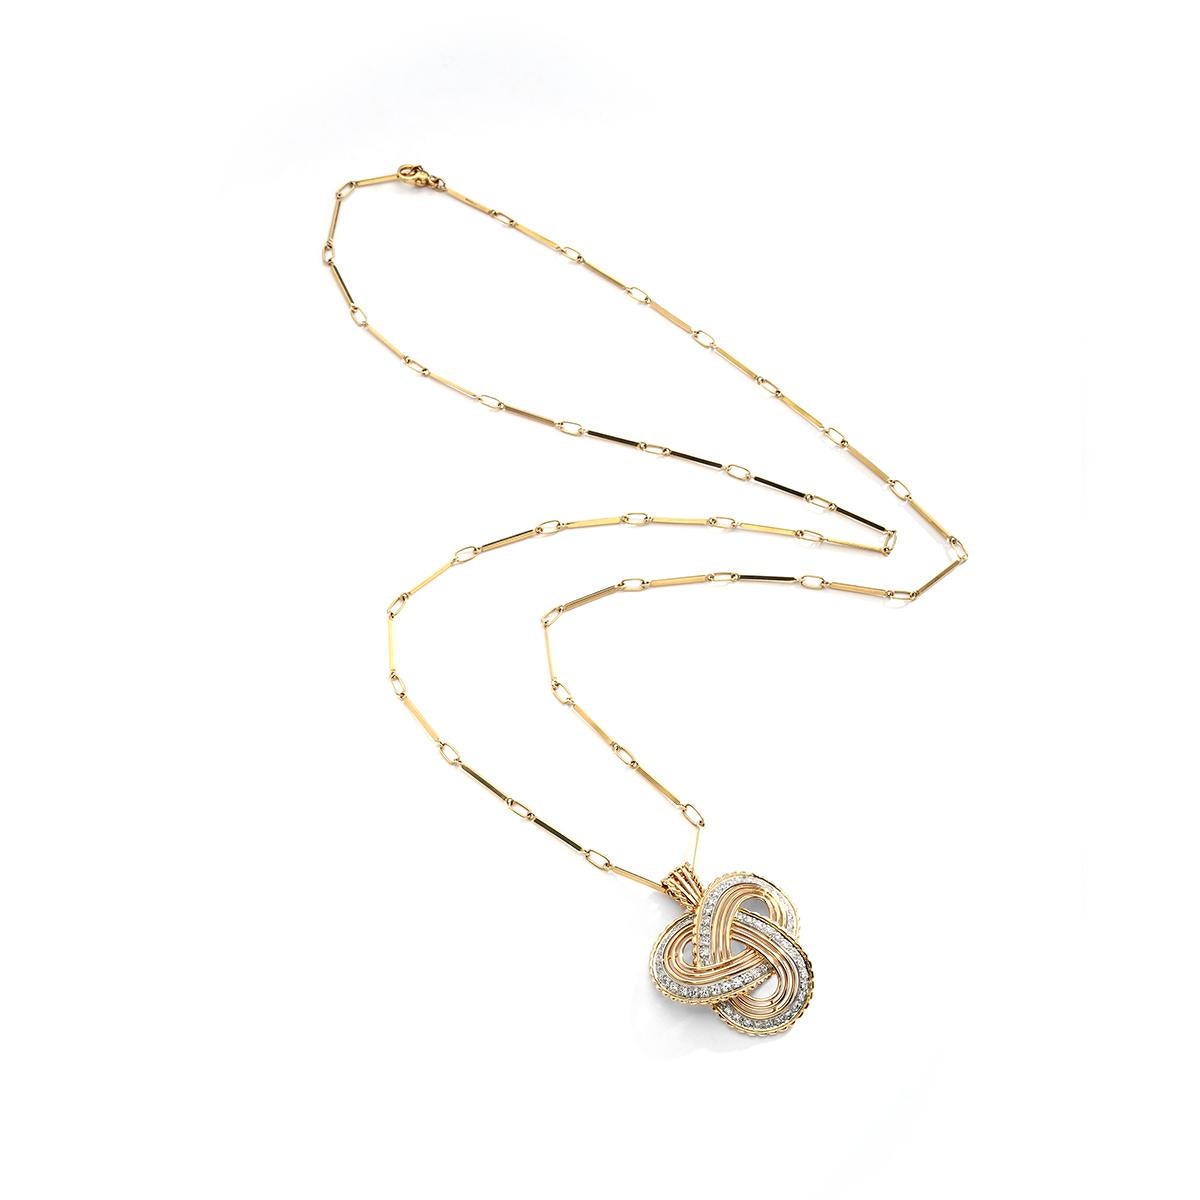 1960S Diamond Yellow Gold  and Platinum Pendant on Gold Sautoir Chain Necklace.

Pendant total height: 1.57 inch (4.00 centimeters).
Pendant total width: 1.38 inch (3.50 centimeters).
Total weight: 24.86 grams.

Former collection of a French